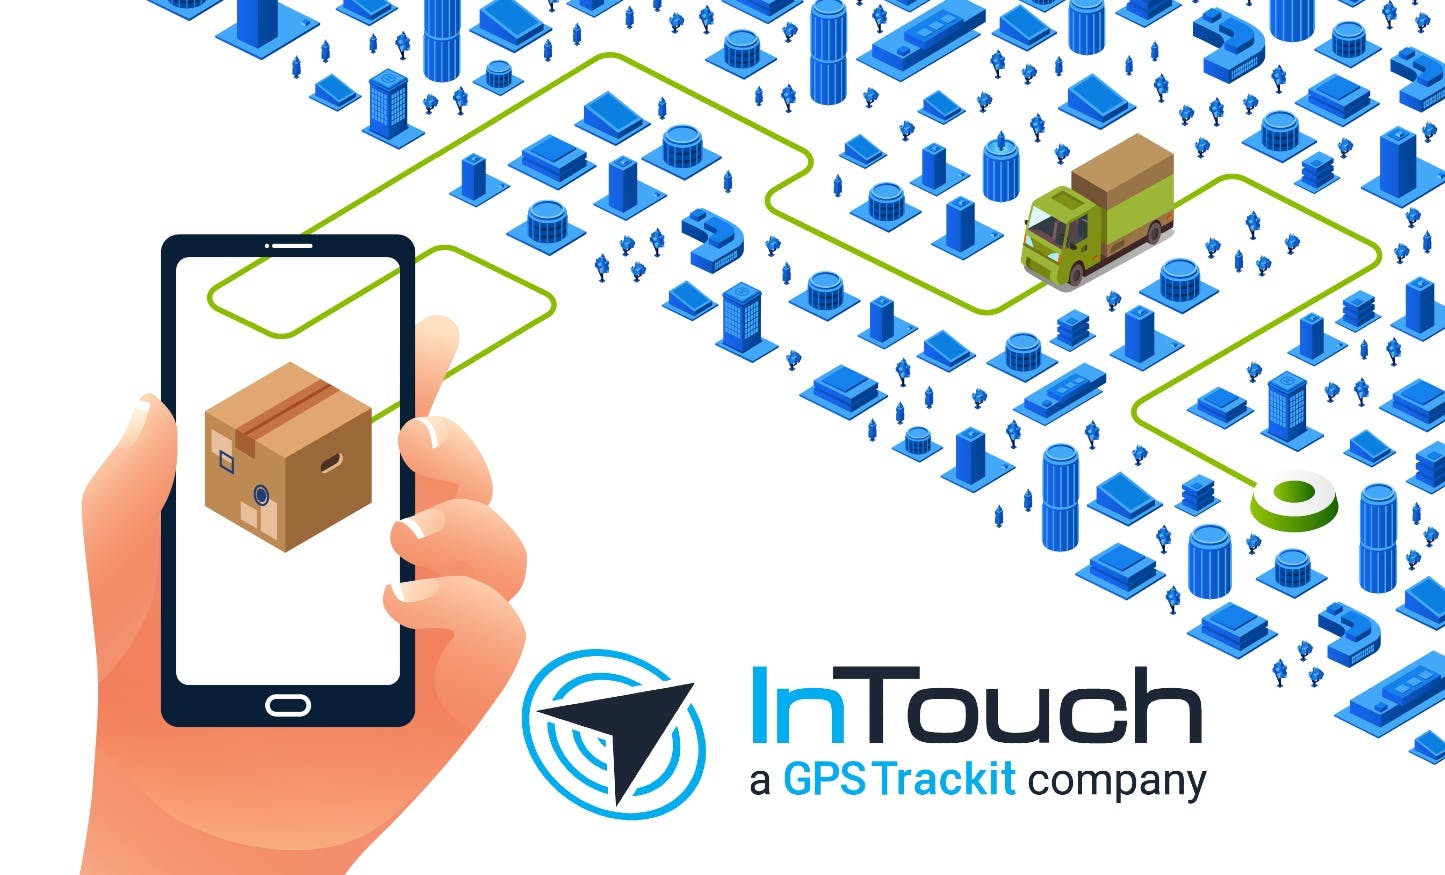 InTouch GPS: Features, Benefits, and Hardware